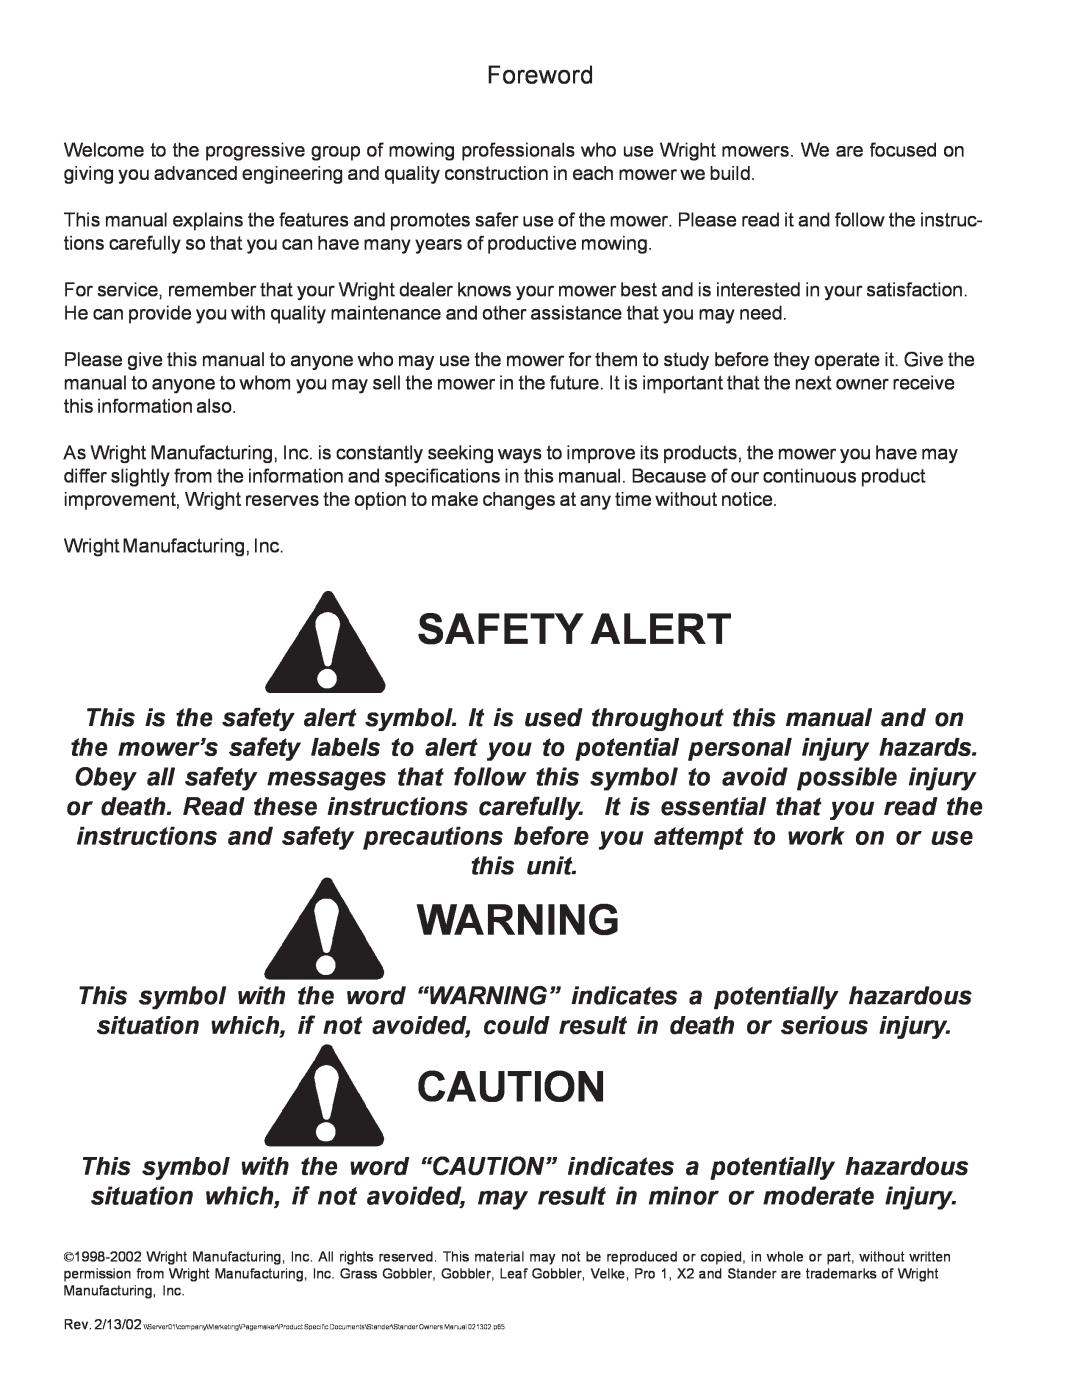 Wright Manufacturing Mower owner manual Foreword, Safety Alert 